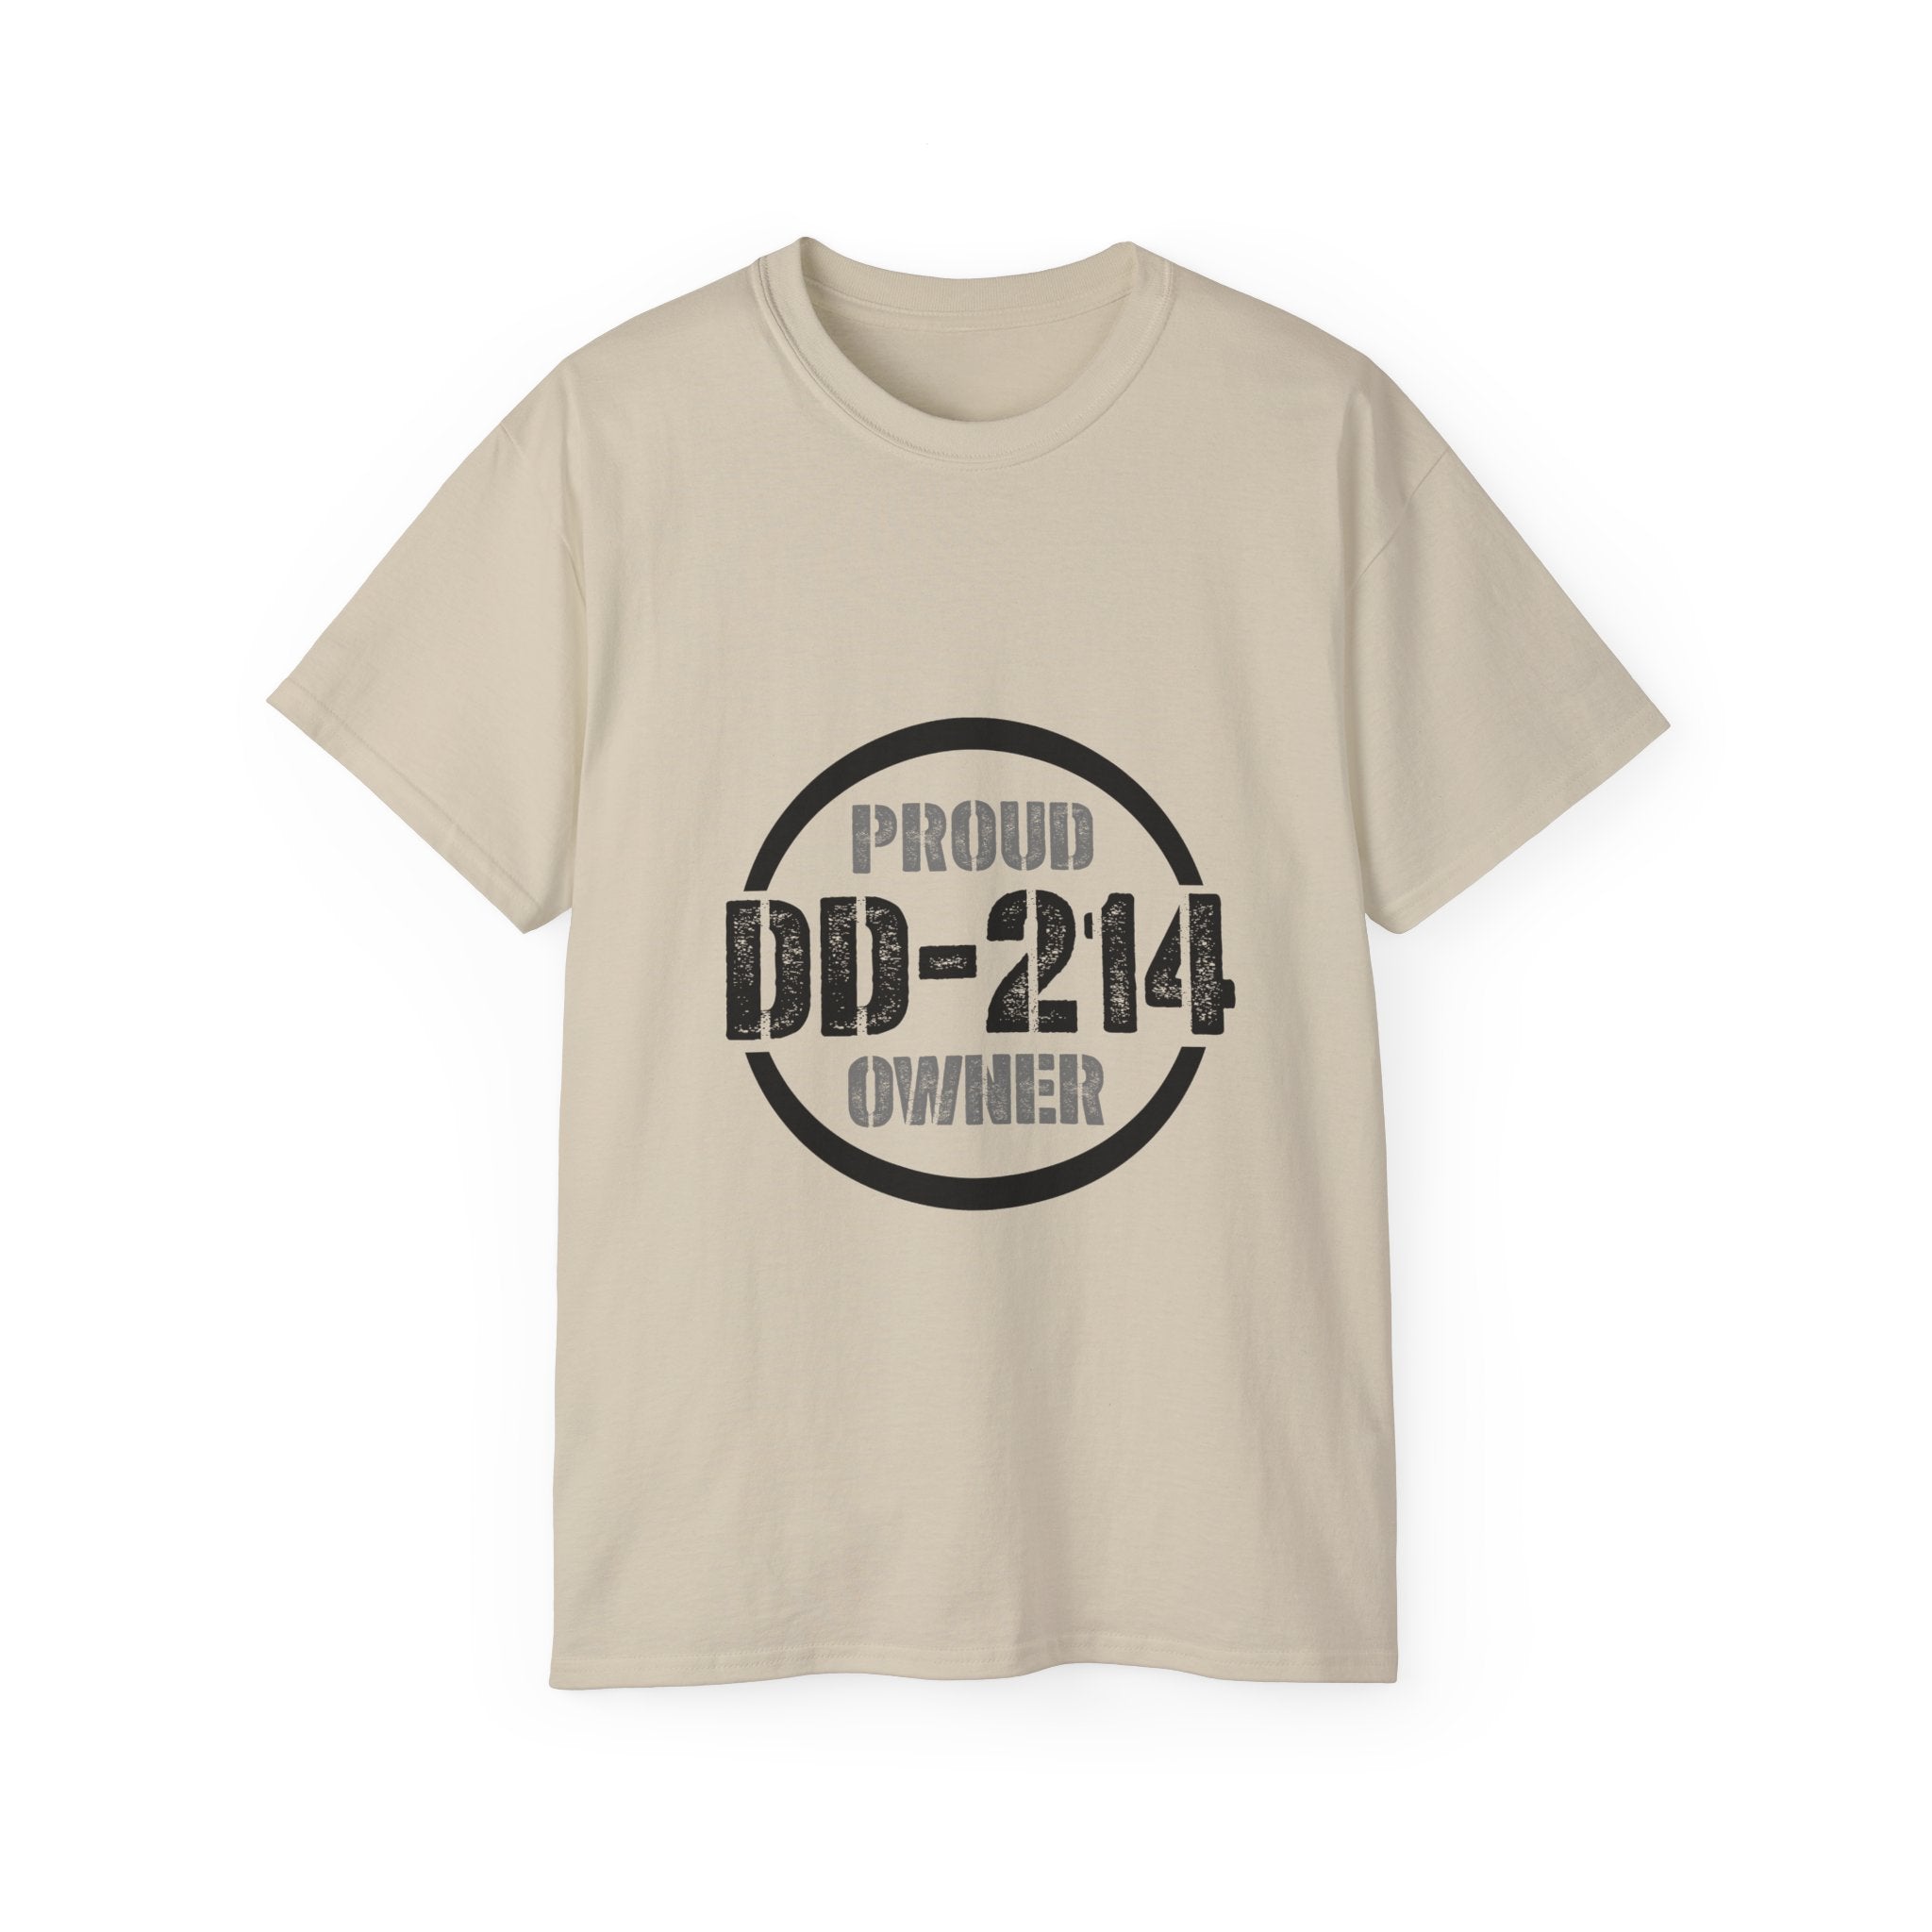 DD-214 Proud Owner Tee - Shop Now - Hippysgoodness